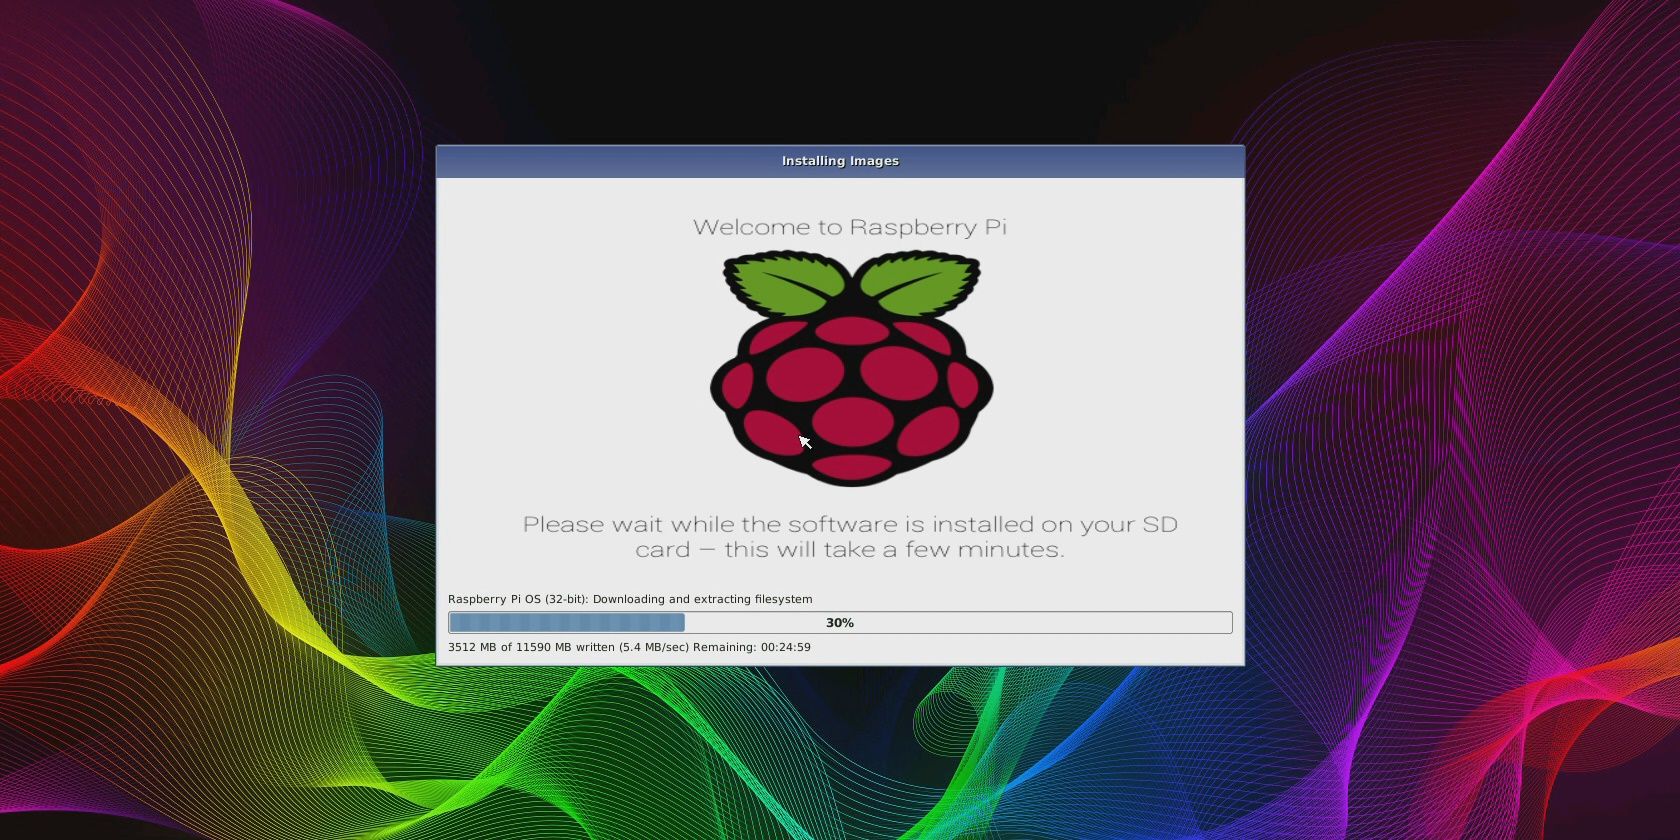 Download links for OS are broken · Issue #630 · raspberrypi/noobs · GitHub